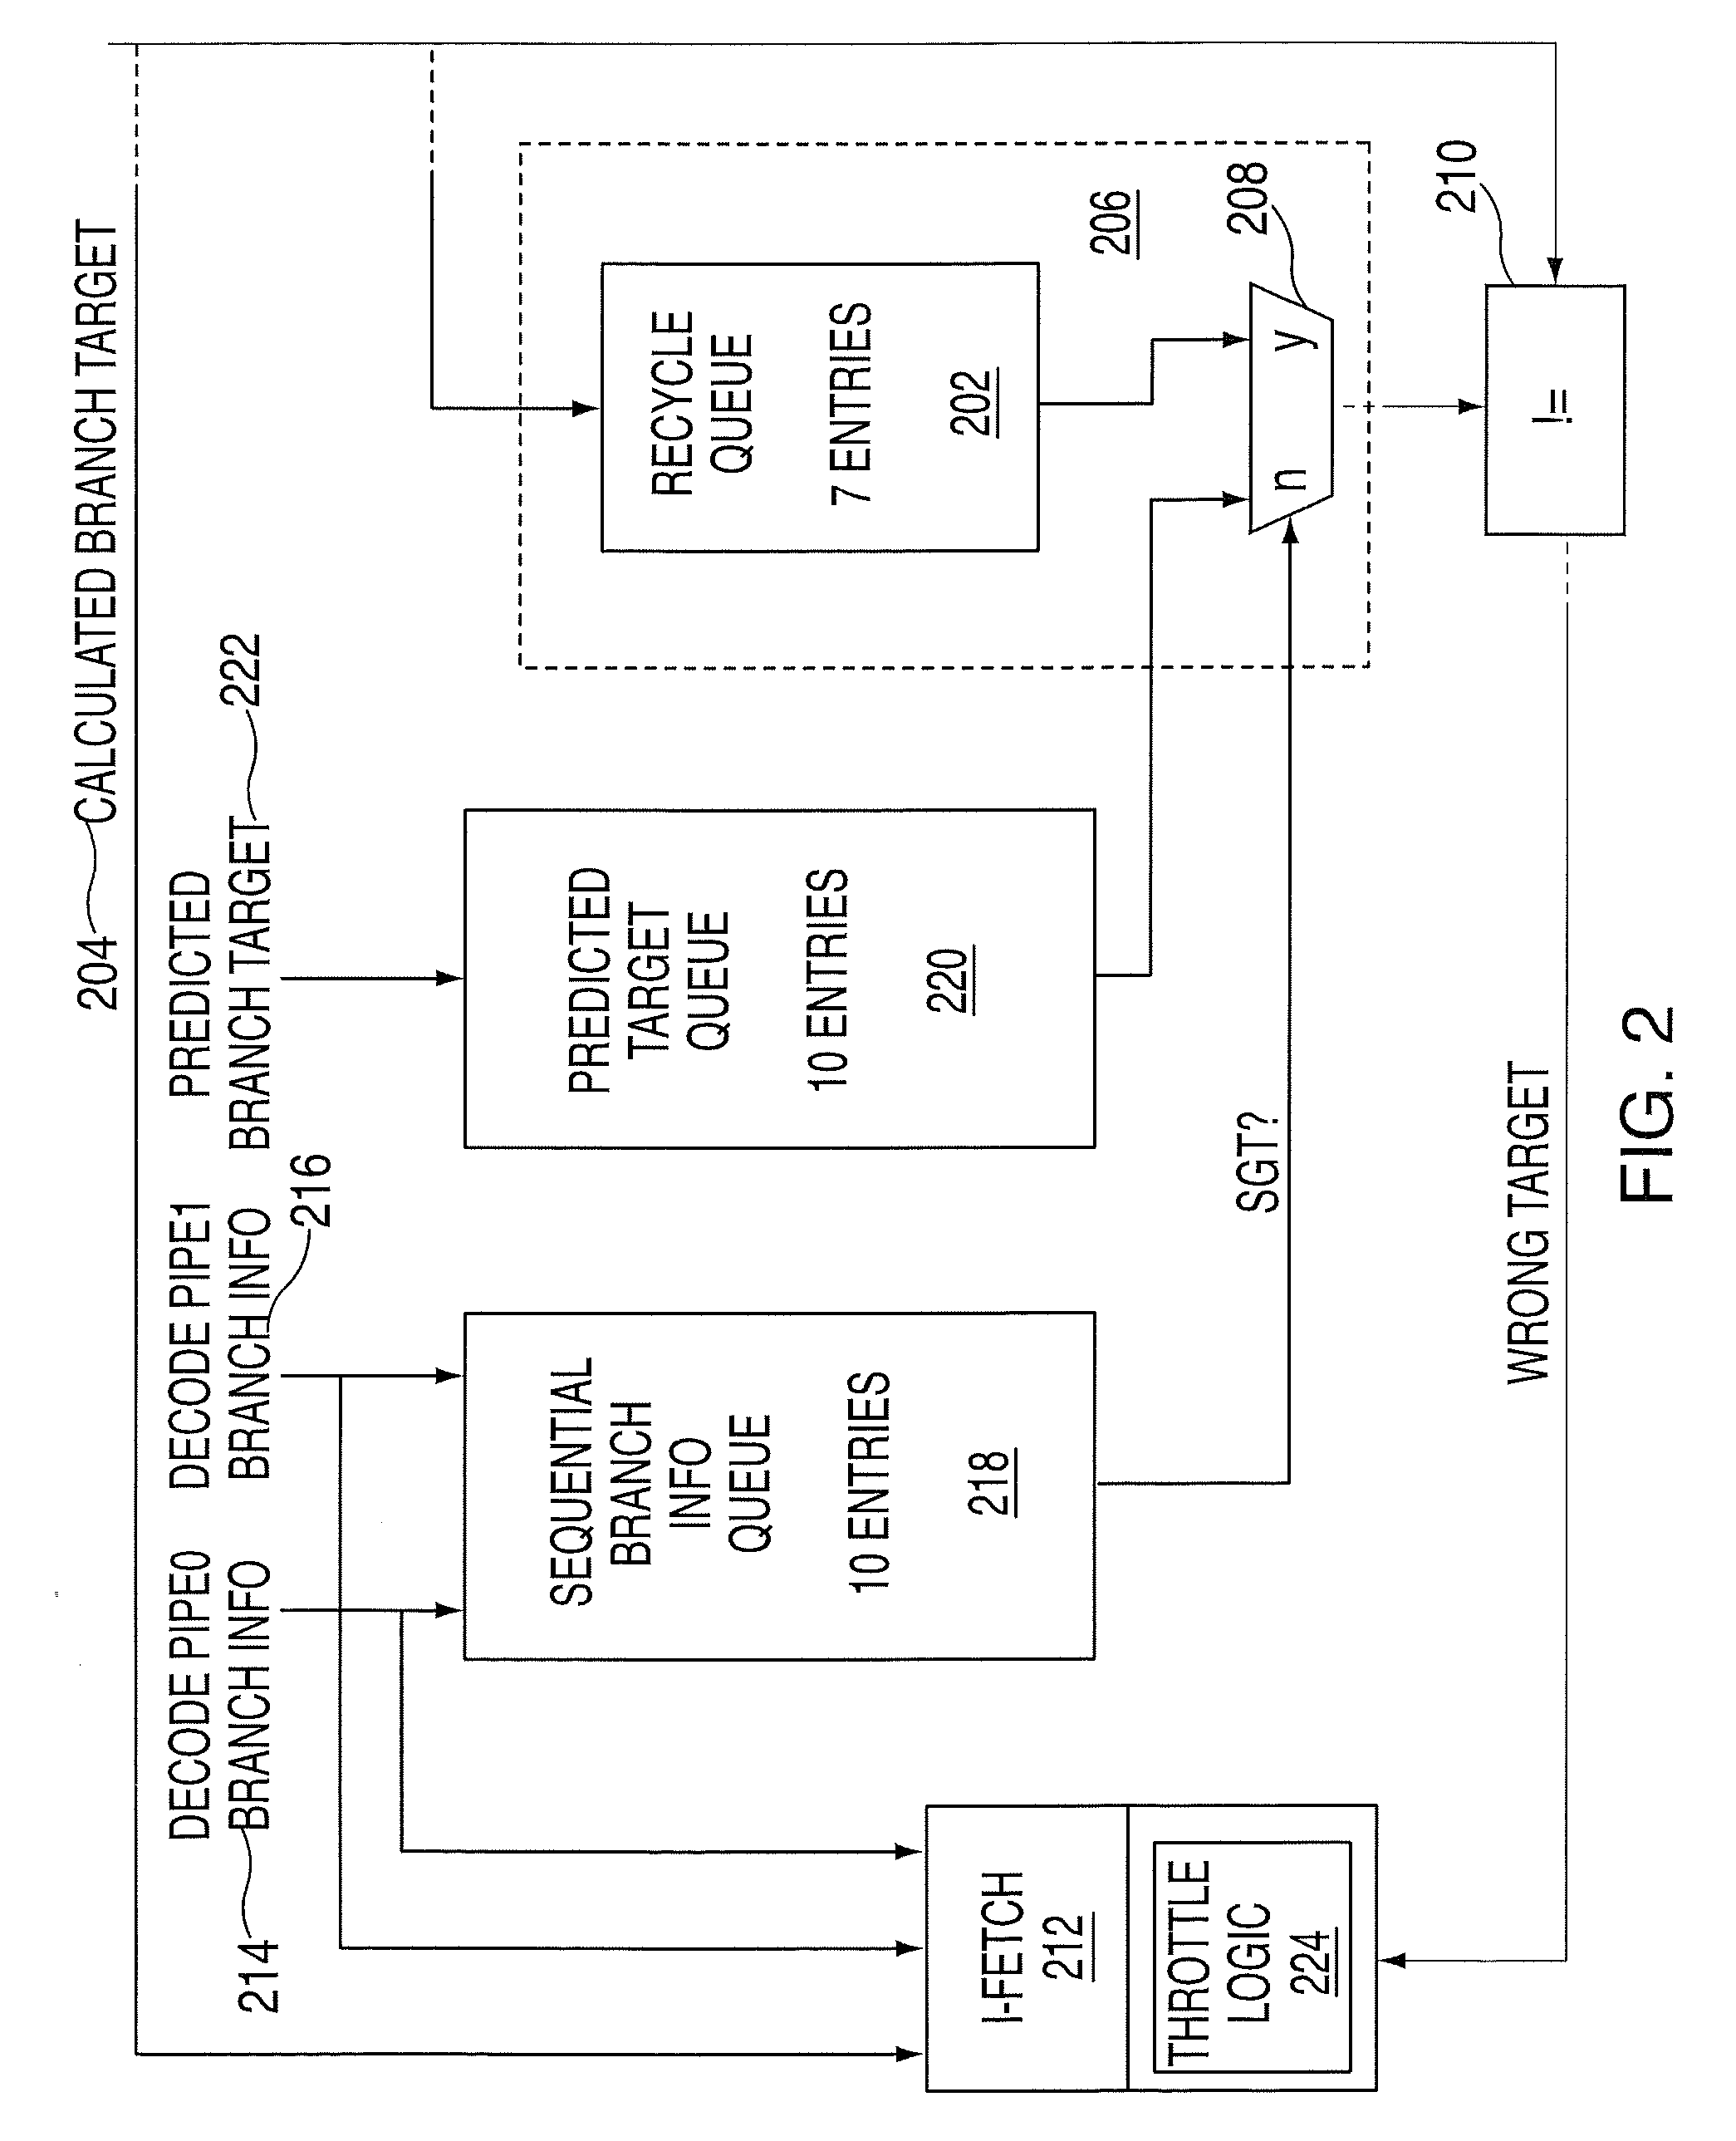 System and method for controlling restarting of instruction fetching using speculative address computations